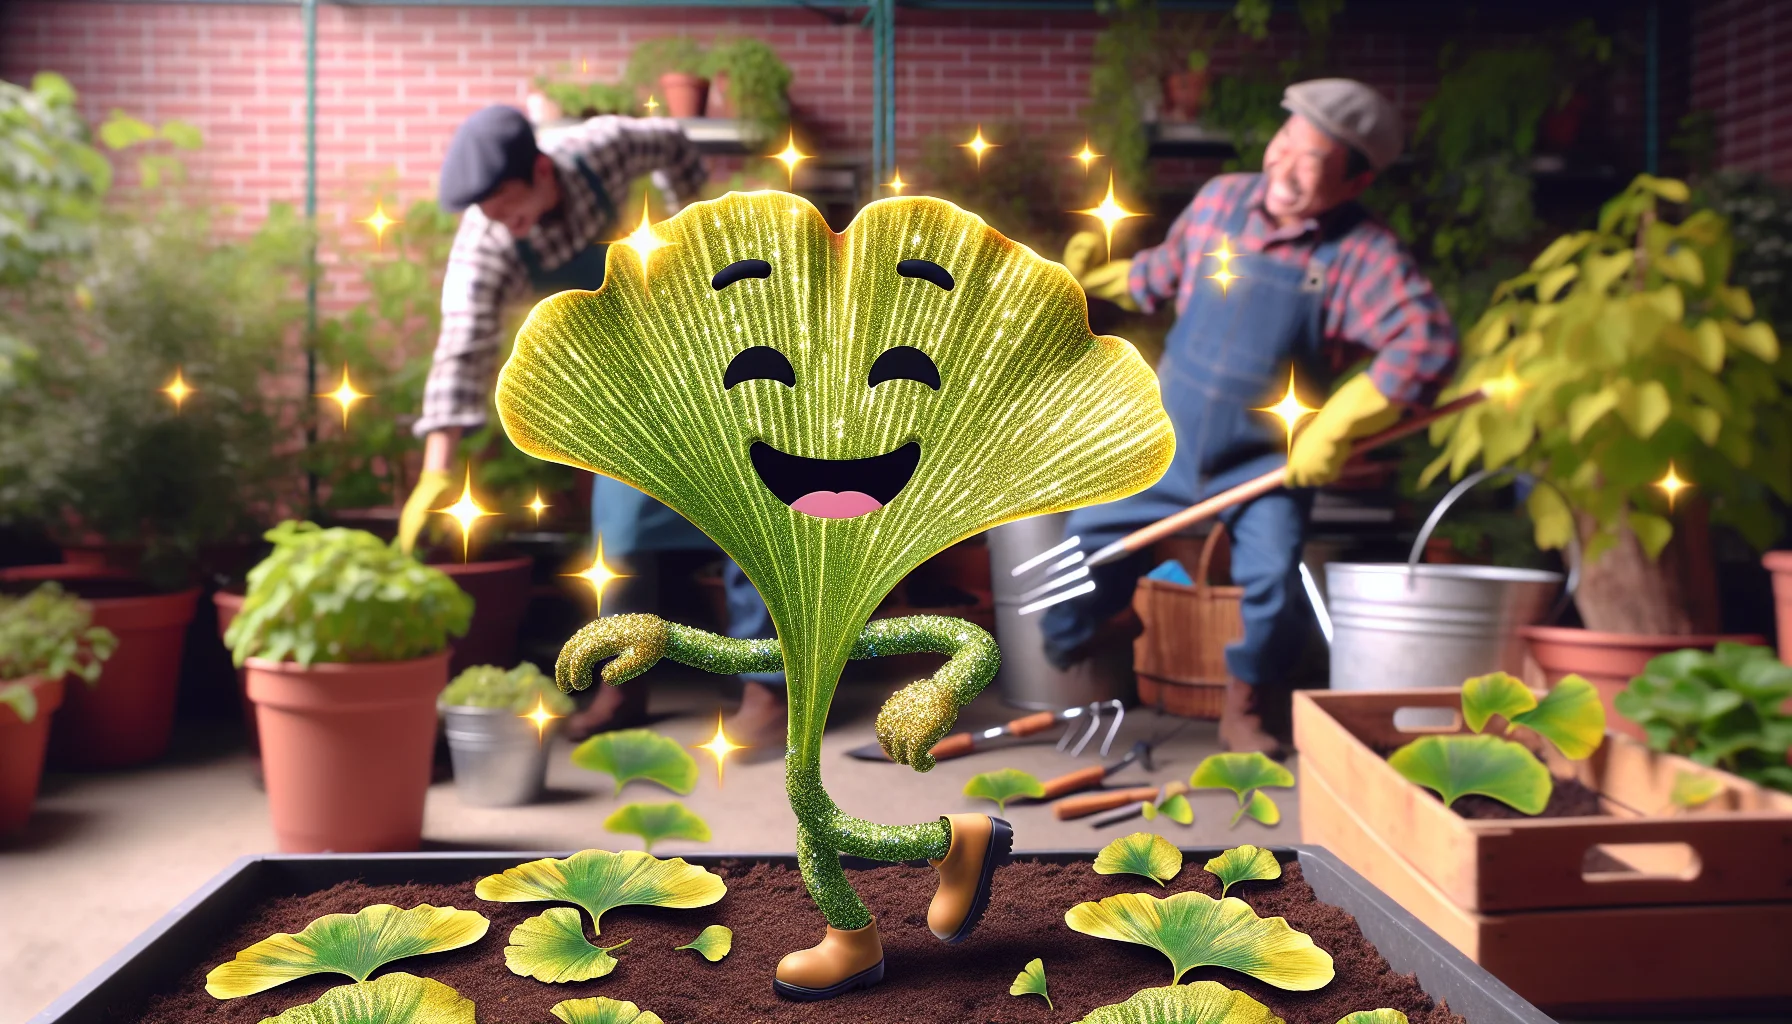 Generate a humorous and engaging image of a sparkling bright ginkgo leaf dancing around happily while gardening. Display human-like, expressive features on the ginkgo leaf encapsulating joy, amusement and life. In the backdrop, demonstrate other miscellaneous plants and gardening tools, literally giggling under the leaf's comedic antics. Let there be a subtle visual sign or symbol providing a hint of the ginkgo leaf's symbolism of longevity, hope, resilience and peace. This lively picture aims to attract and inspire people of all descents and genders to appreciate the beauty of gardening.